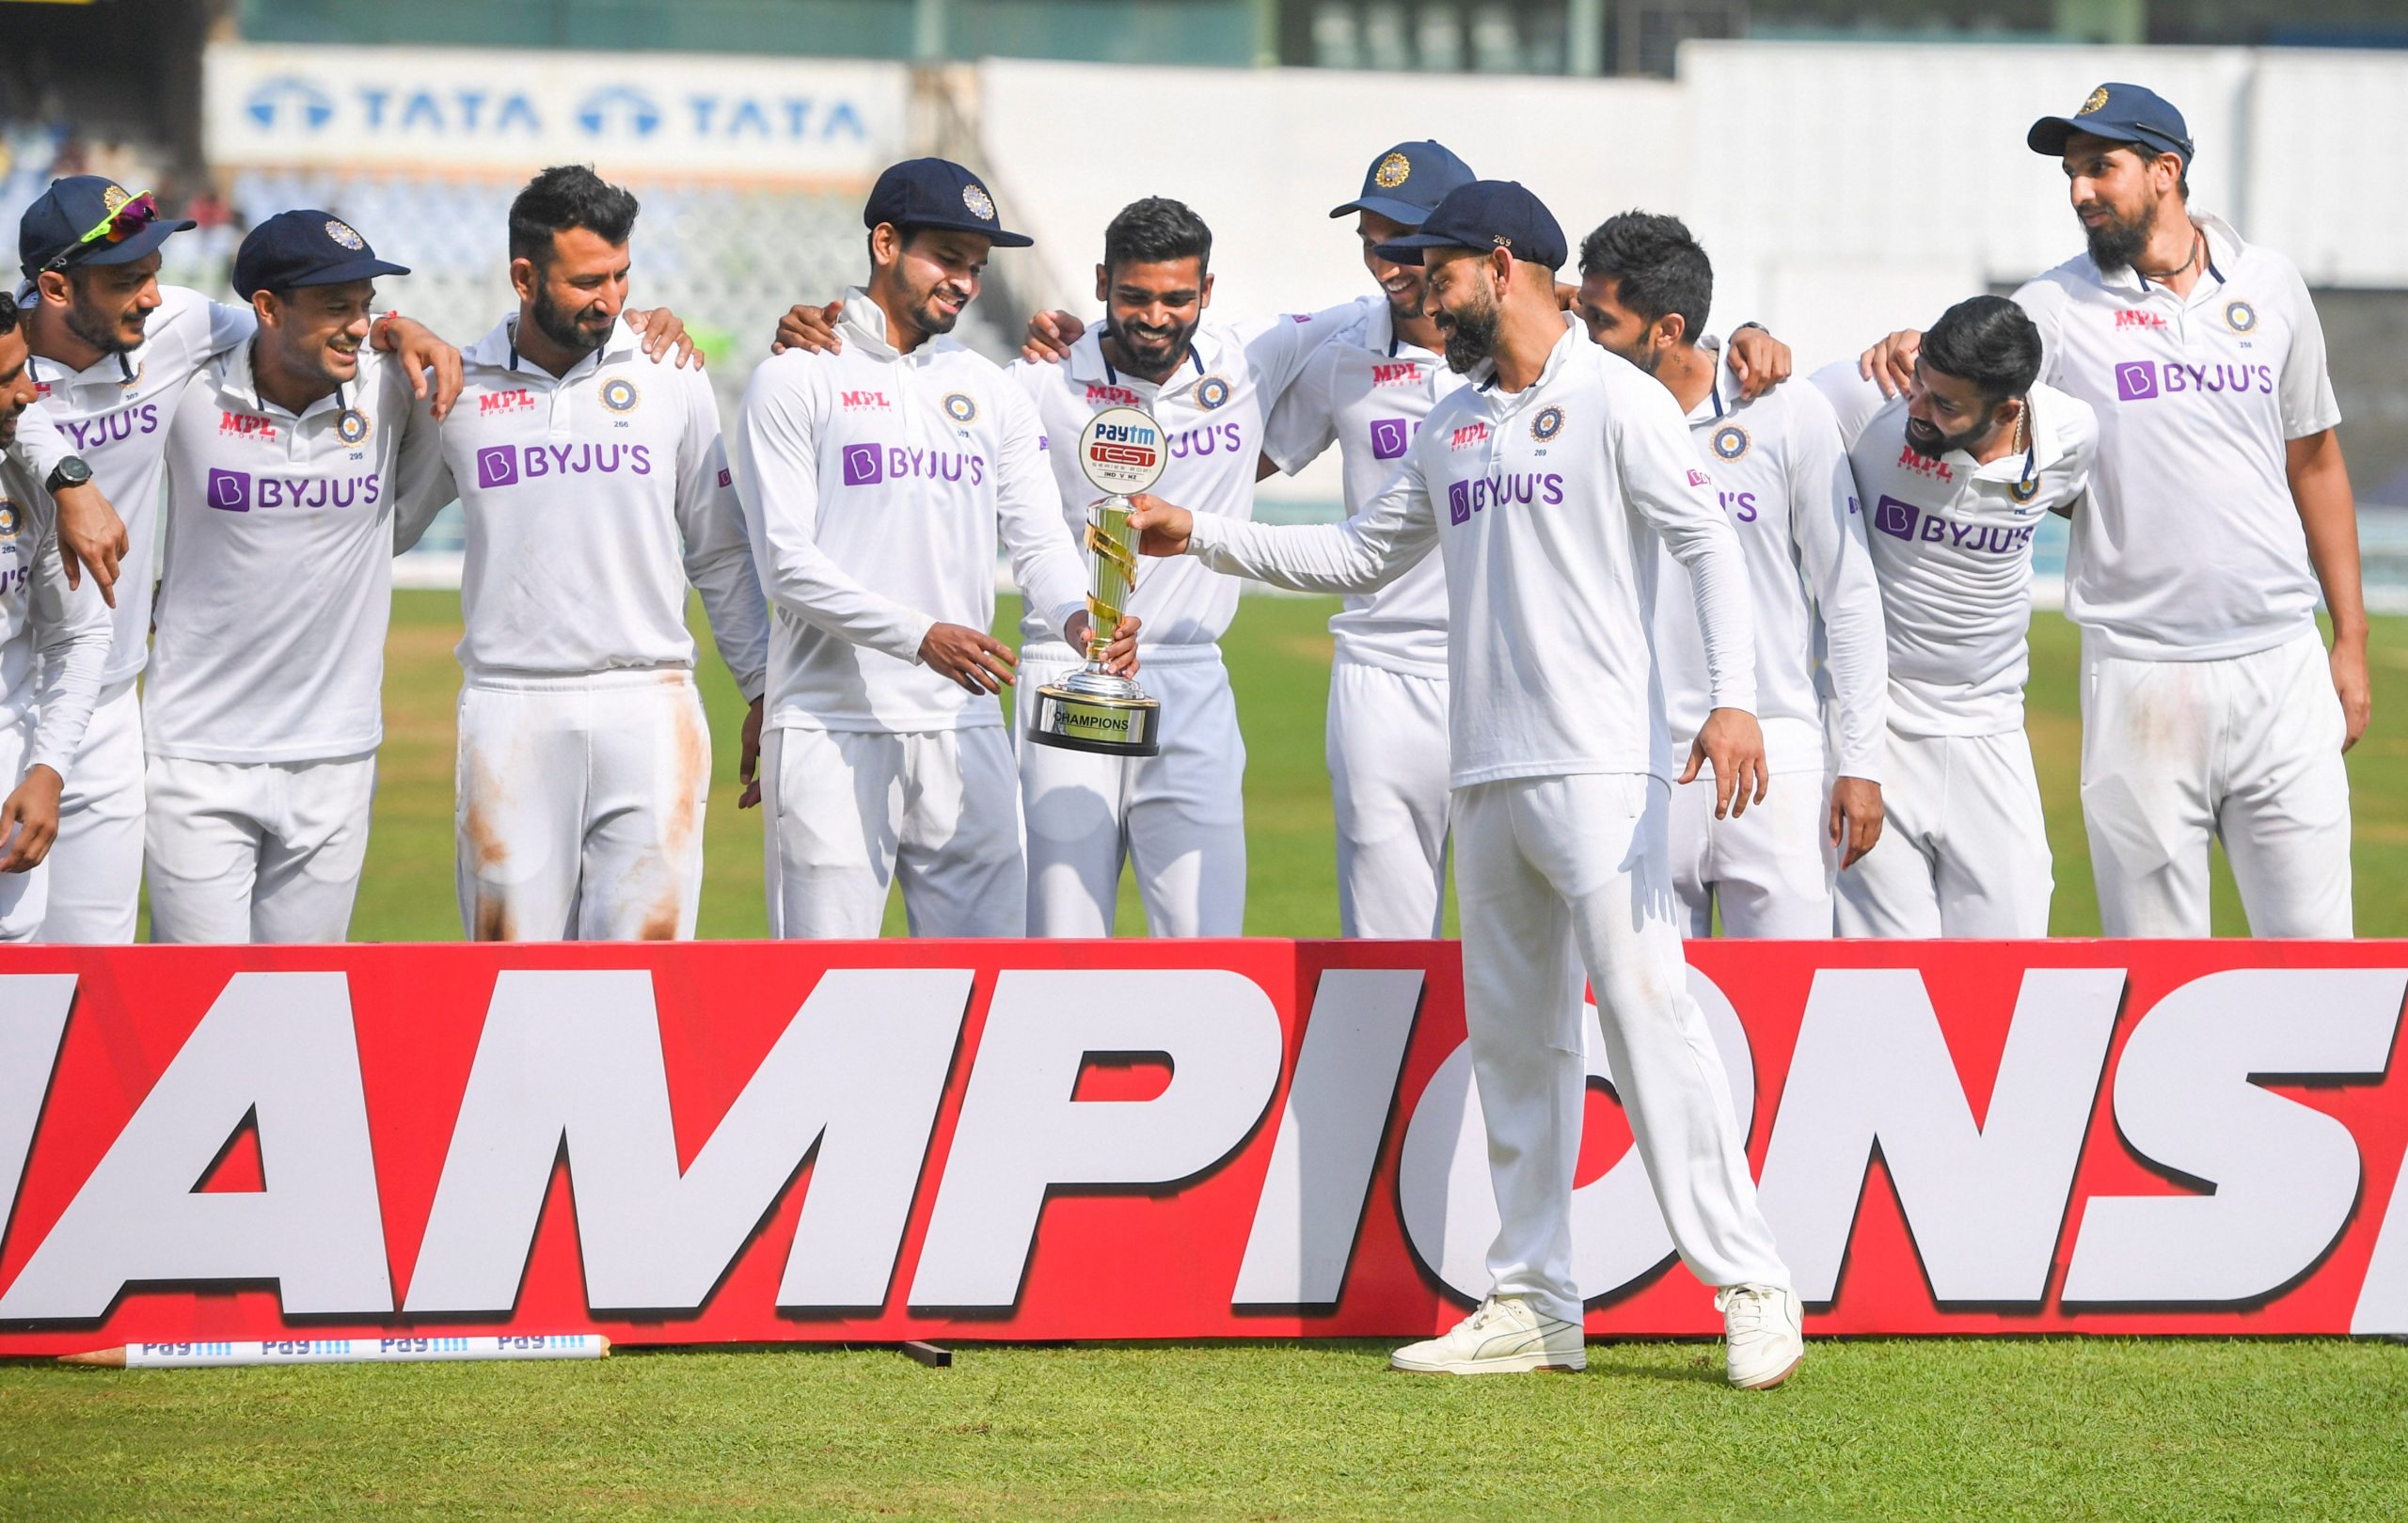 Masters of their backyard: World lauds India’s record win vs New Zealand